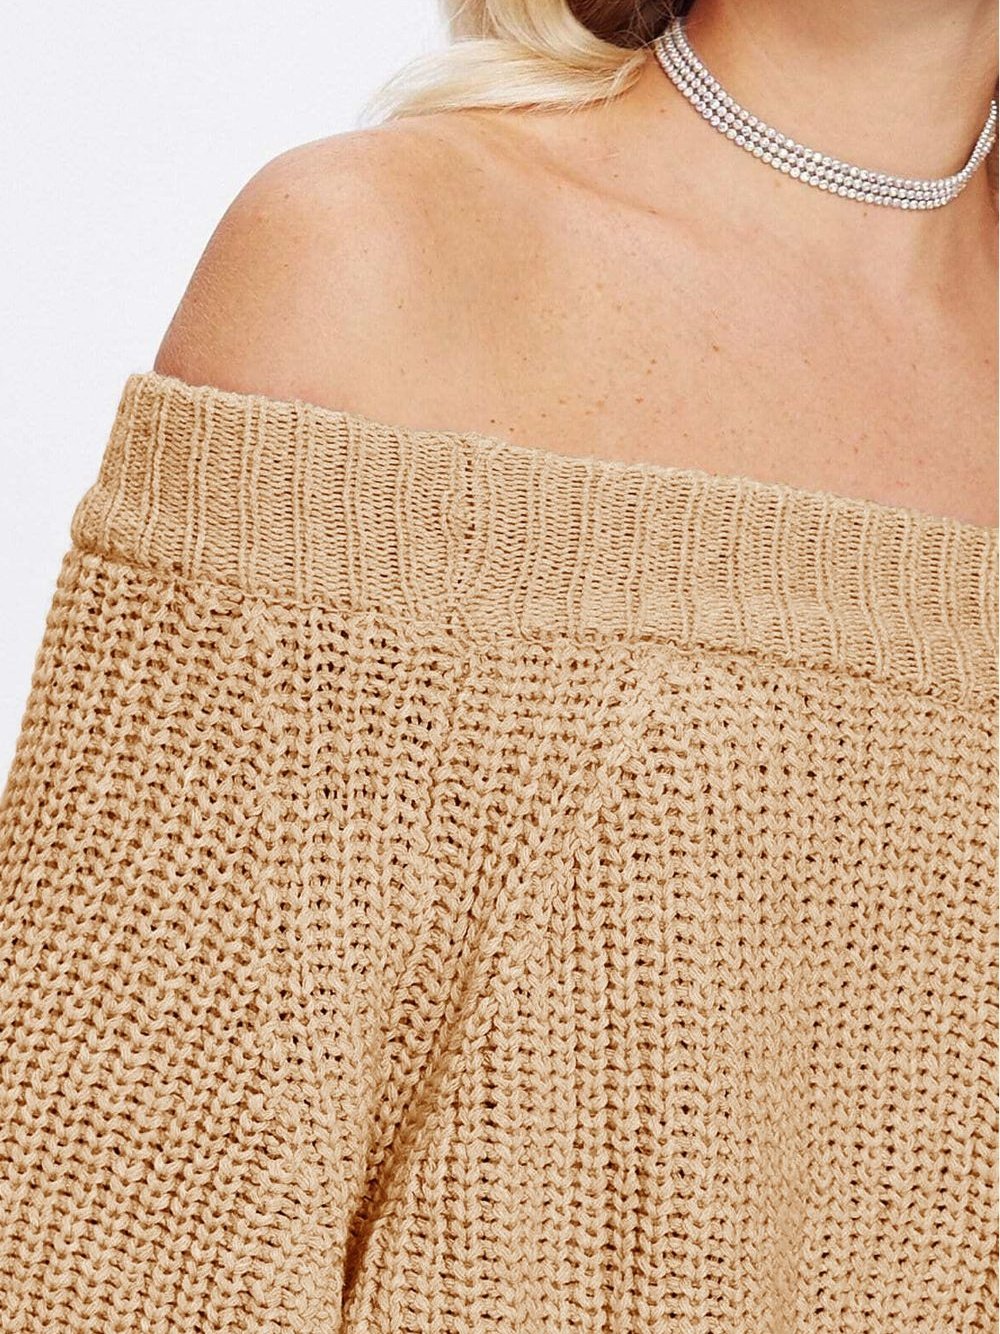 Double Take Off-Shoulder Long Sleeve Sweater